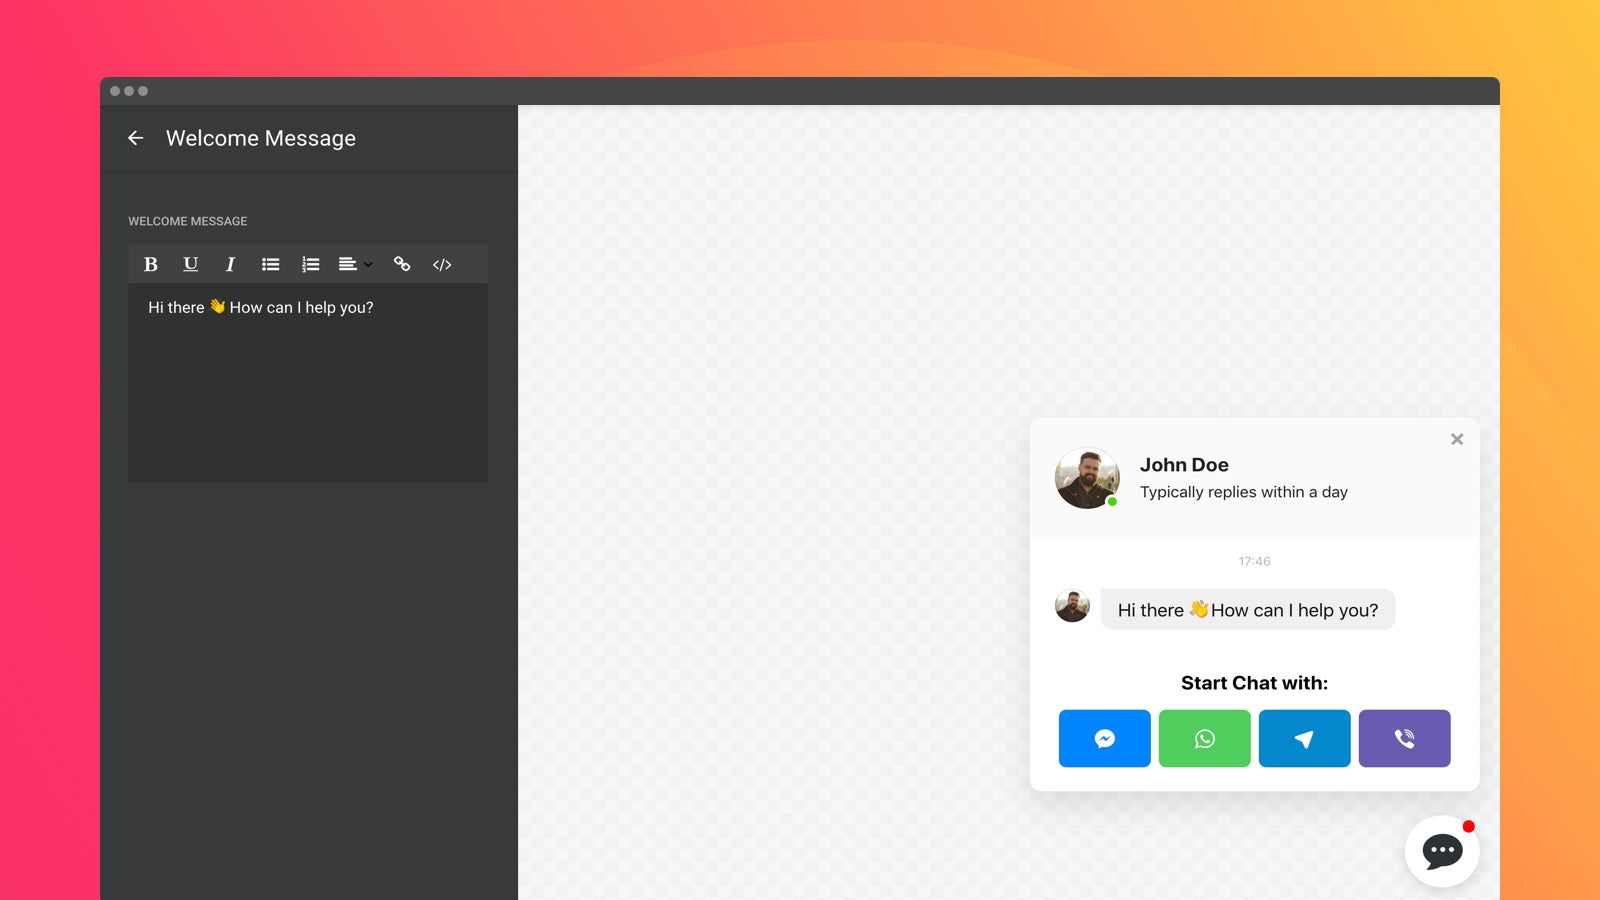 Draw users in chats with the help of engaging welcome message